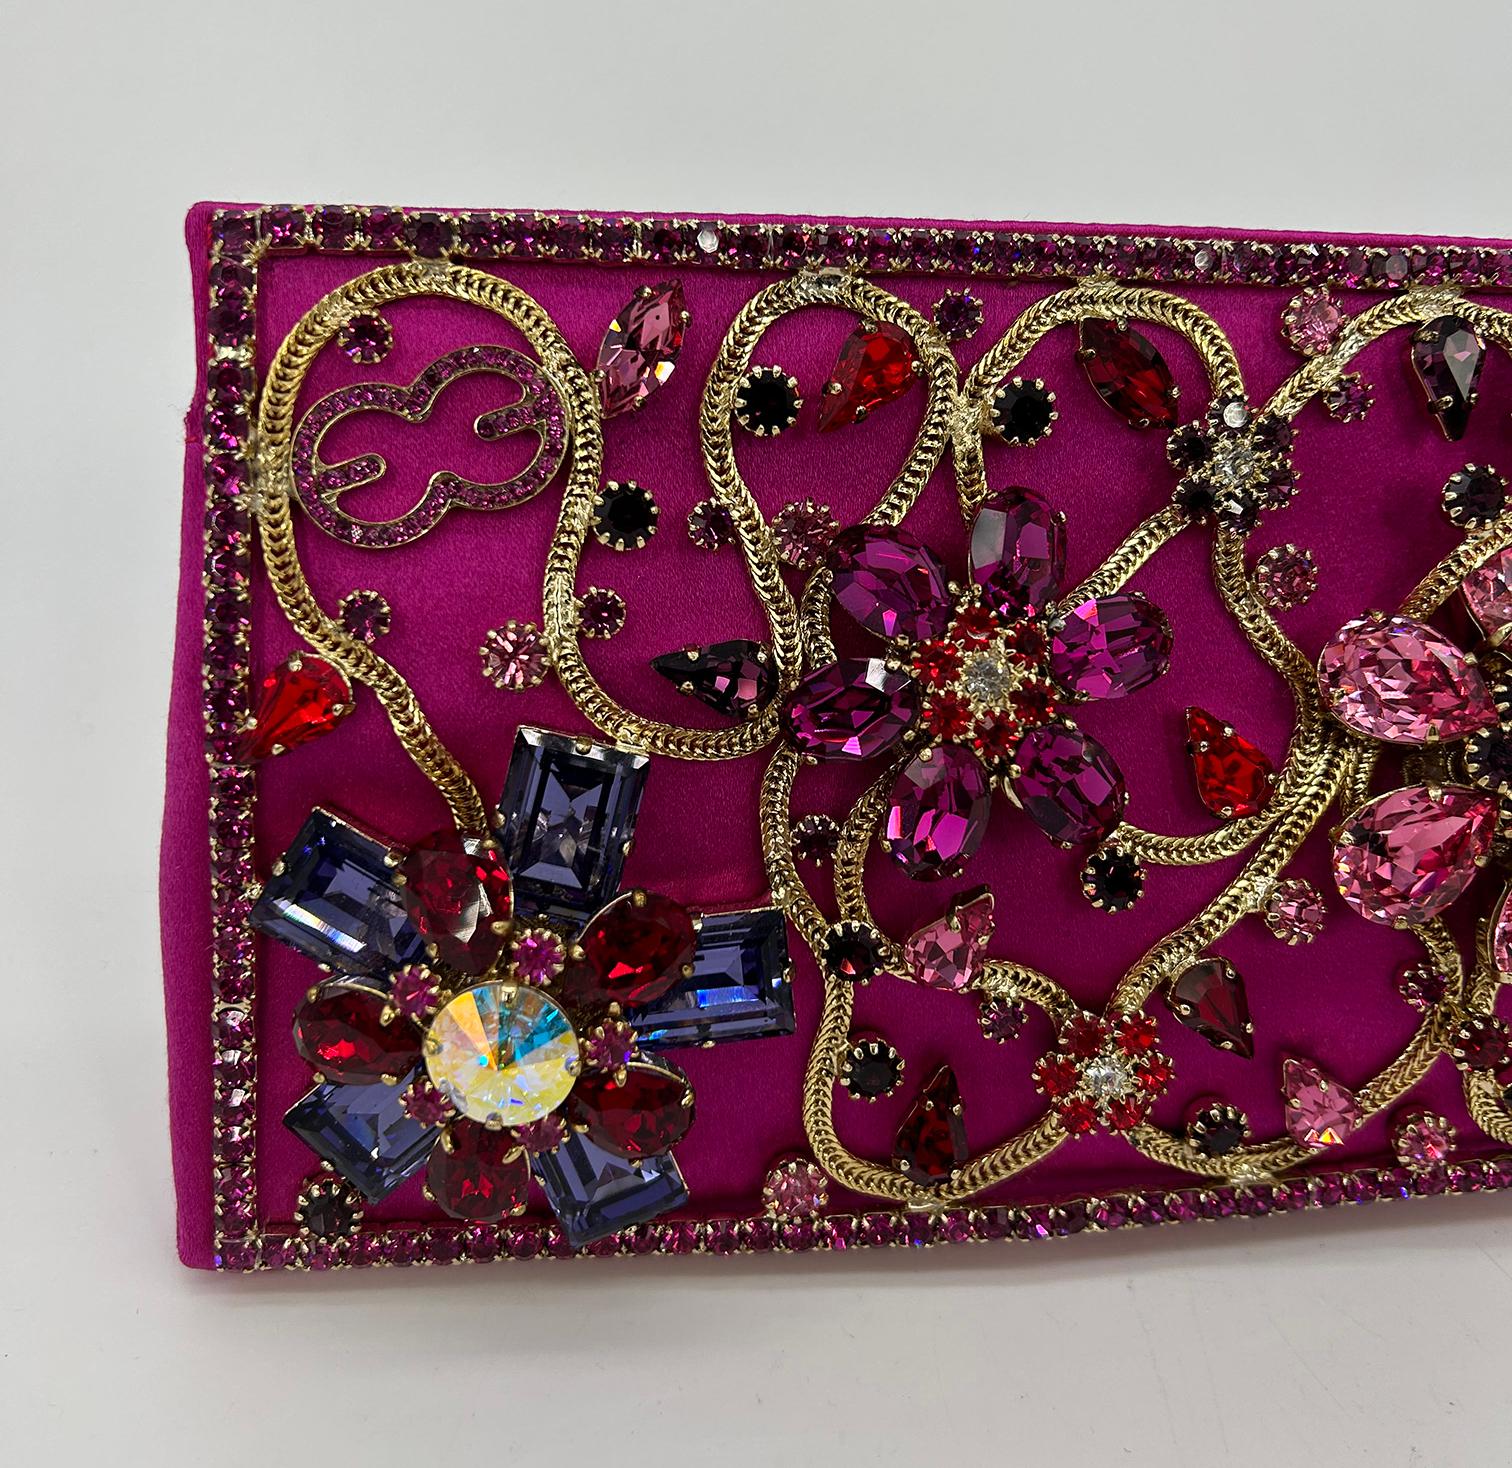 Escada Pink Silk Jeweled Rhinestone Pochette Clutch in excellent like new condition. Pink silk exterior trimmed with gold chain and multicolor rhinestones along front side. Gold chain sewn into front with pink rhinestone border and signature EE logo